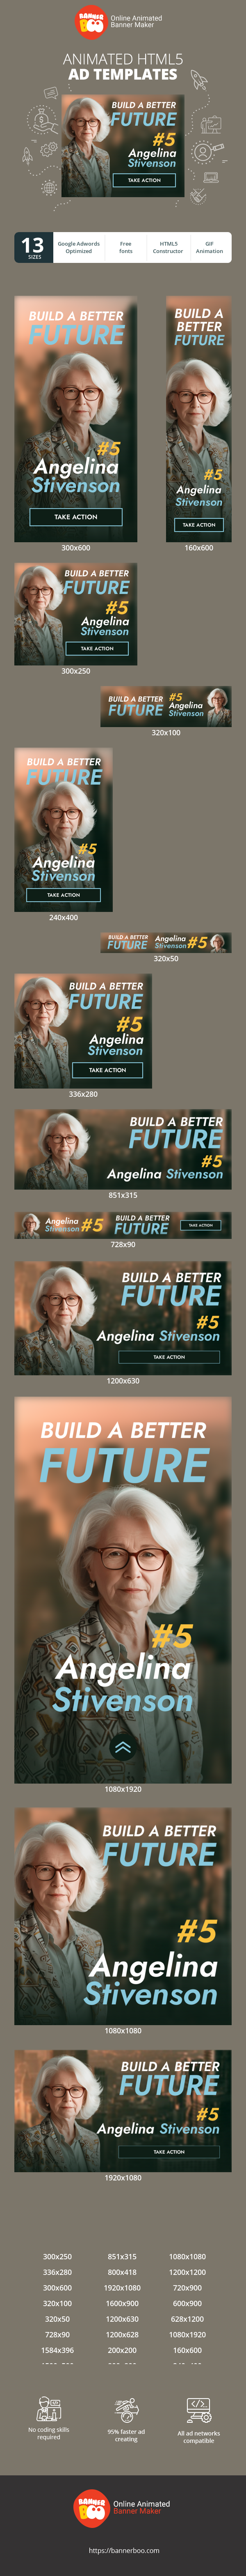 Banner ad template — Build A Better Future #5 Angelina Stivenson — Election Day